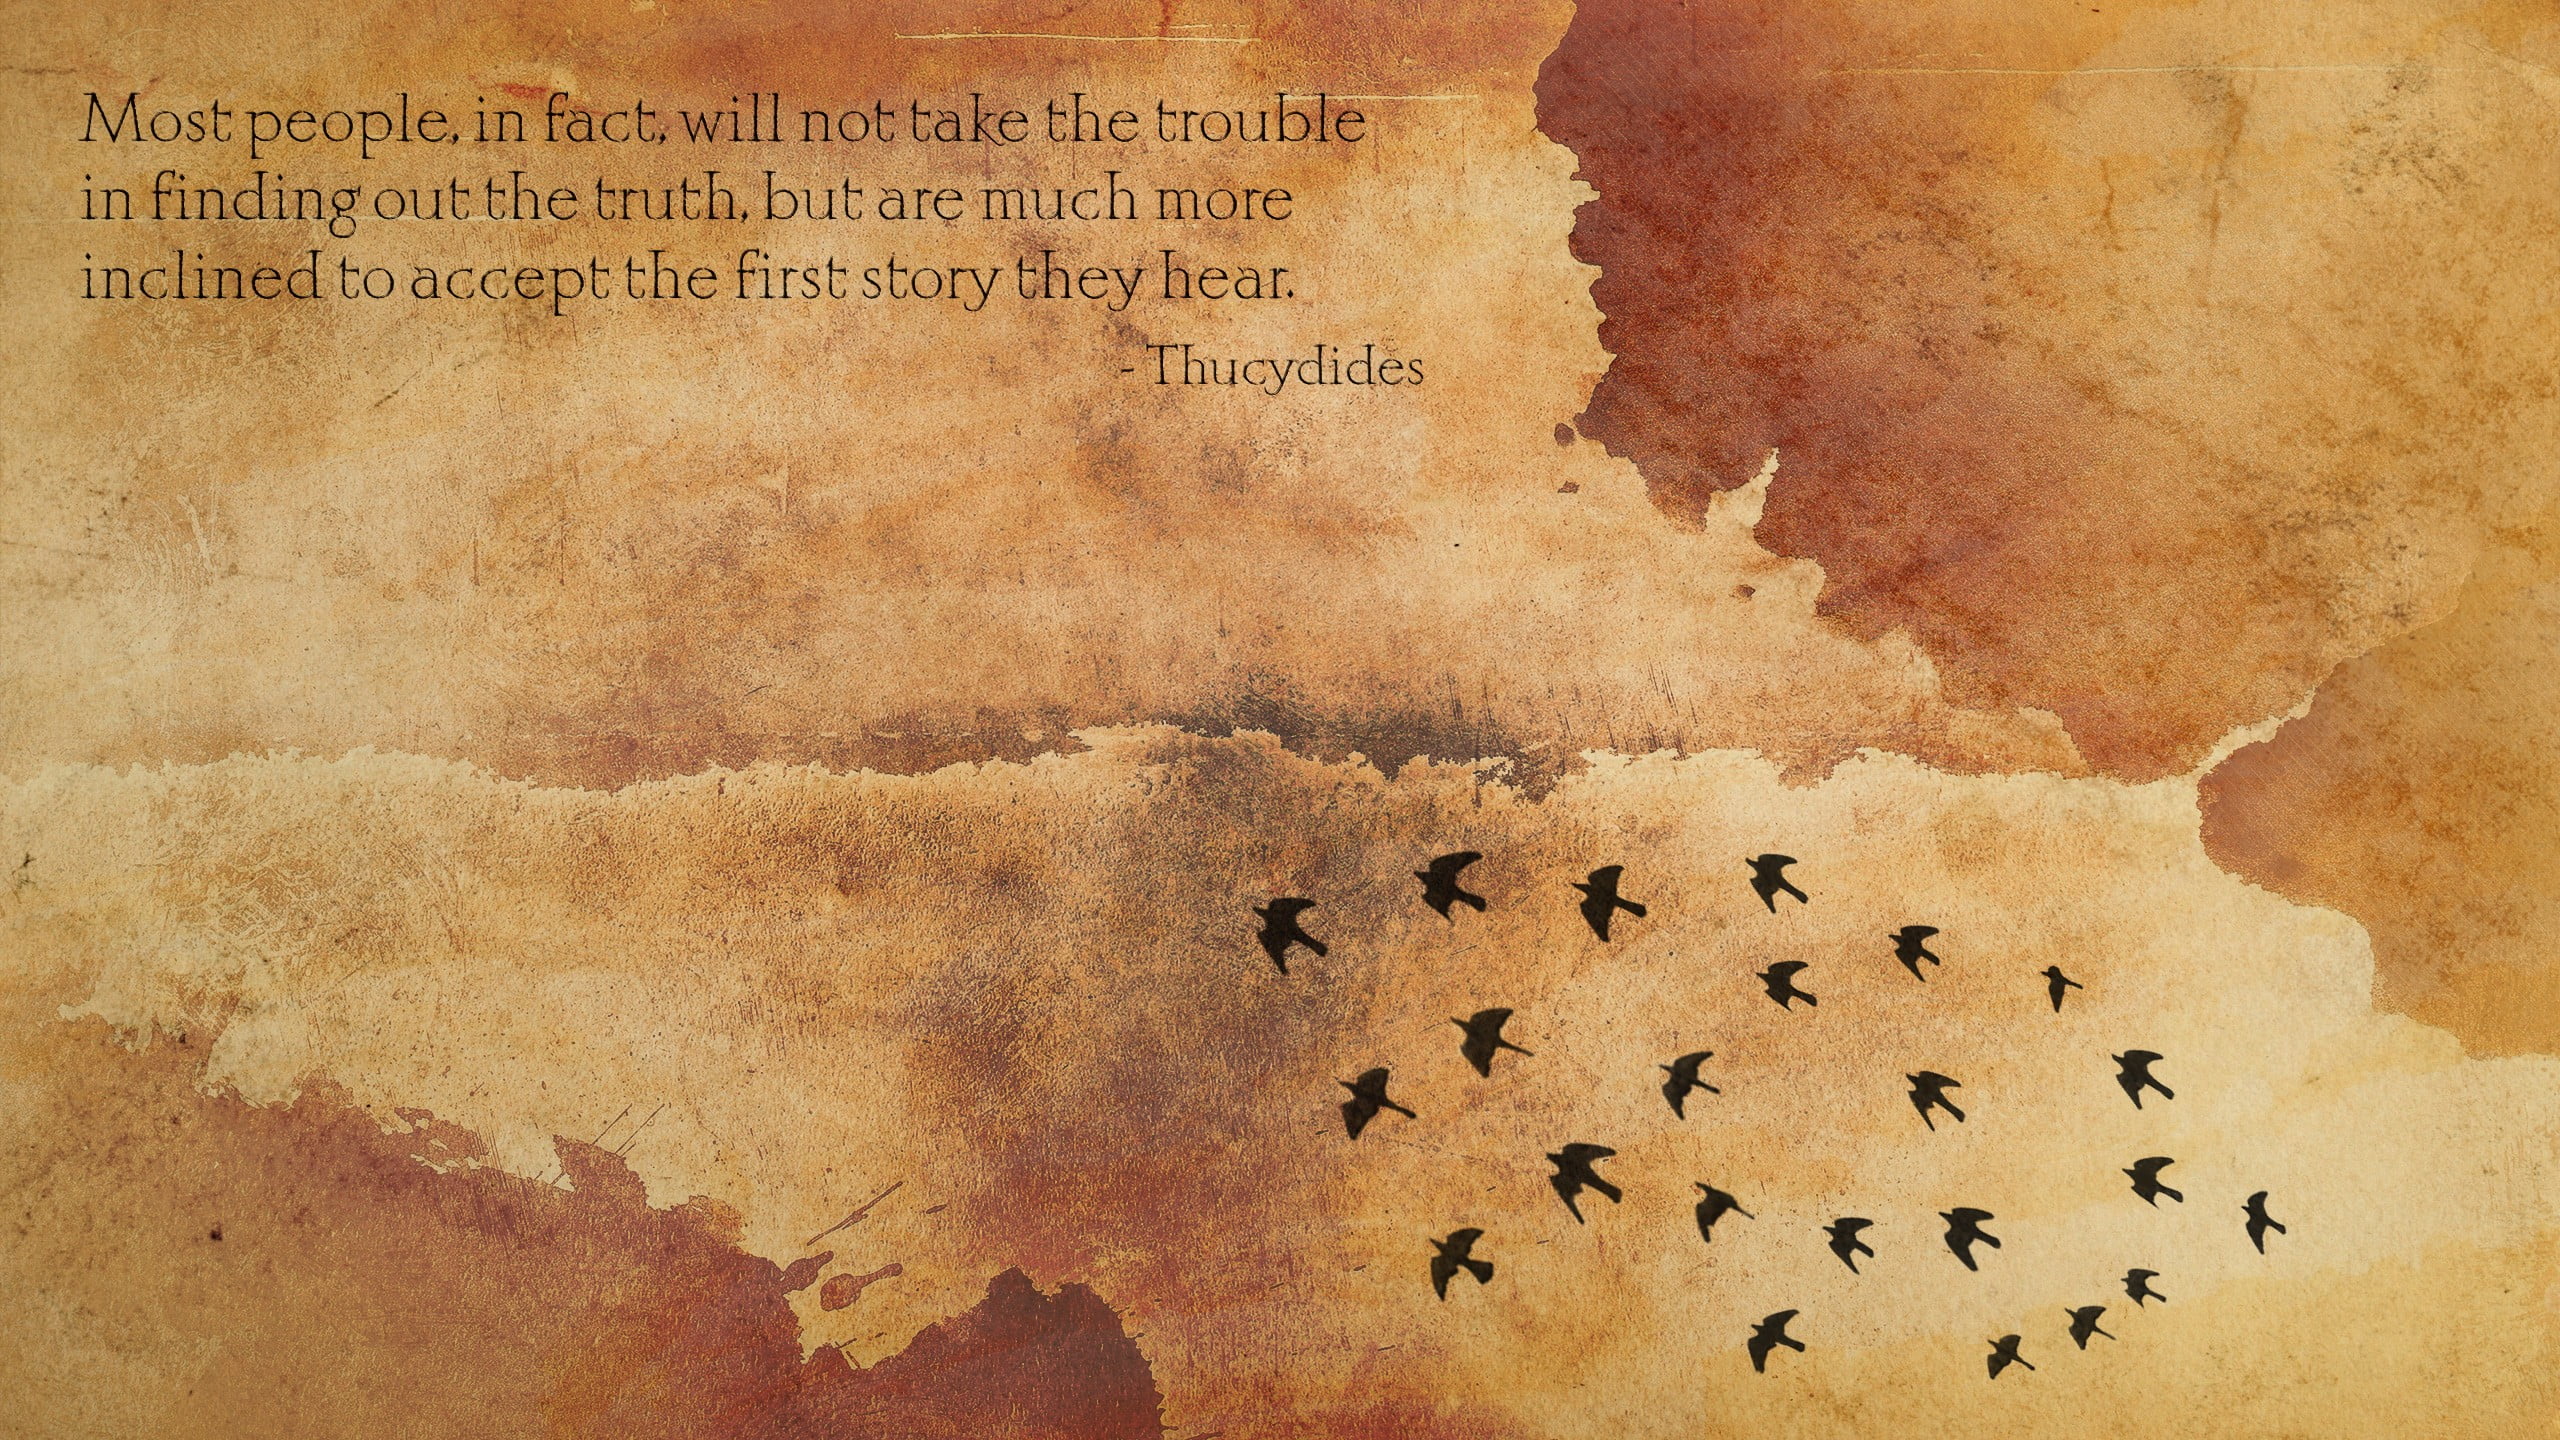 birds illustration and quote, paper, Thucydides, no people, group of animals